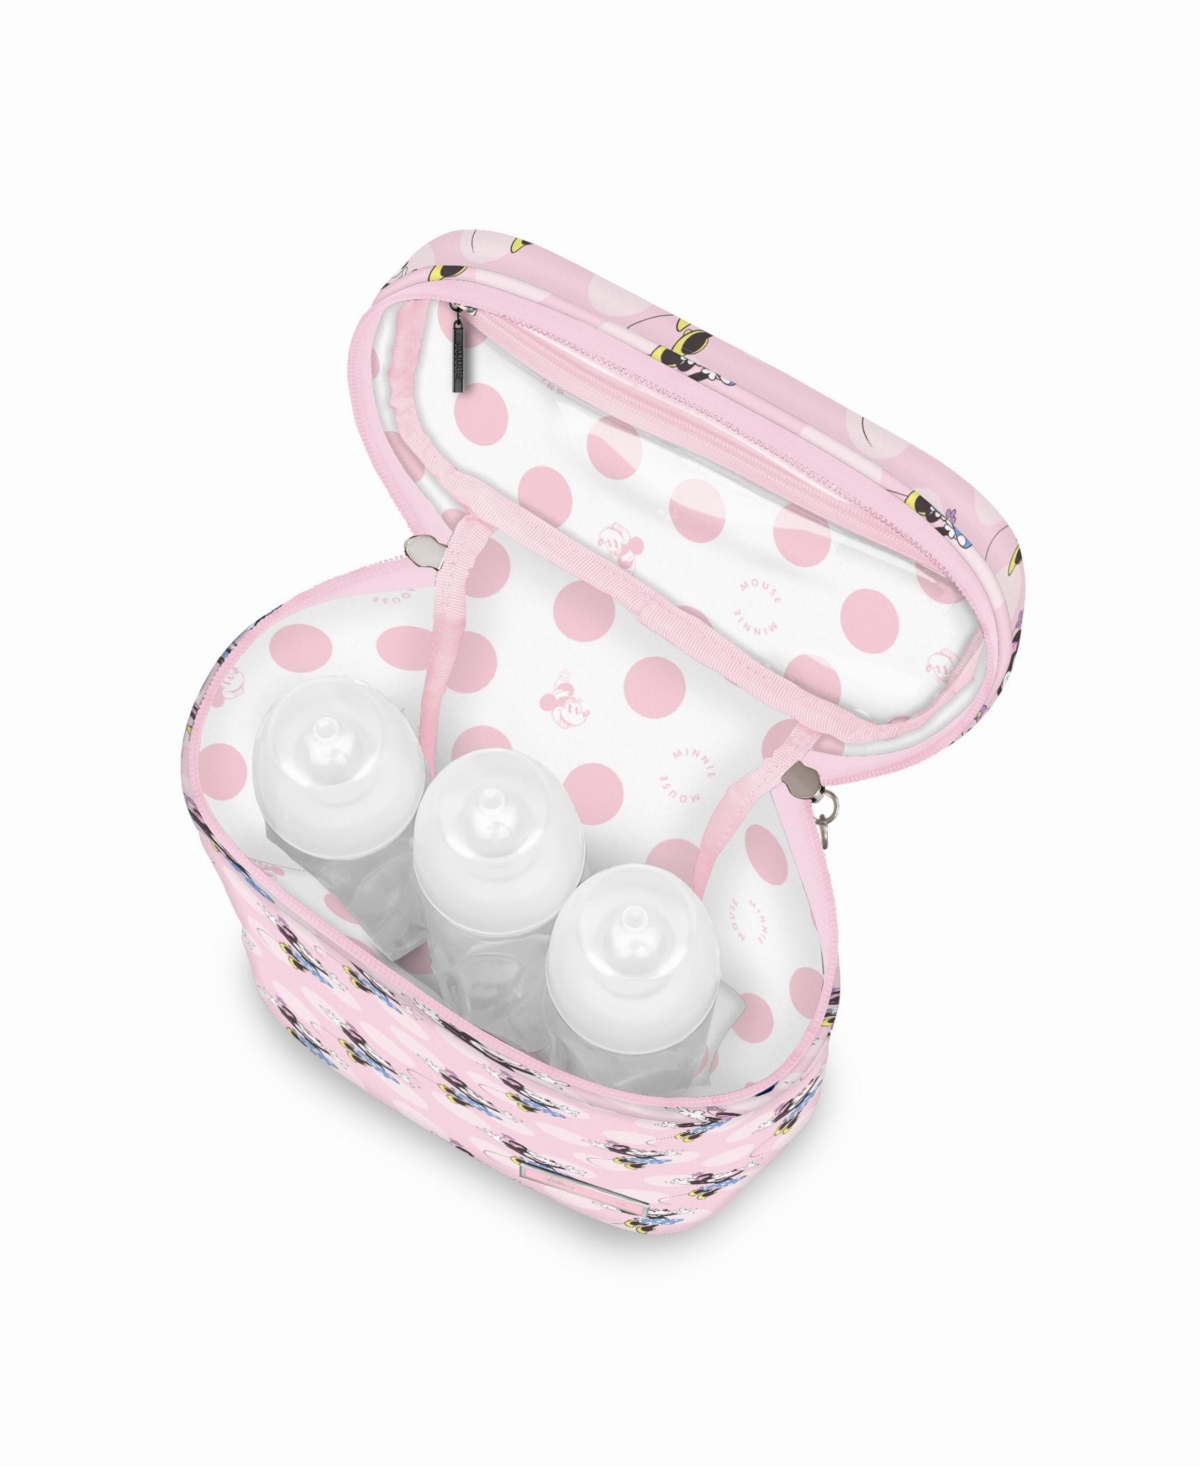 Shop Ju-ju-be Minnie Mouse Fuel Cell Bag In Be More Minnie